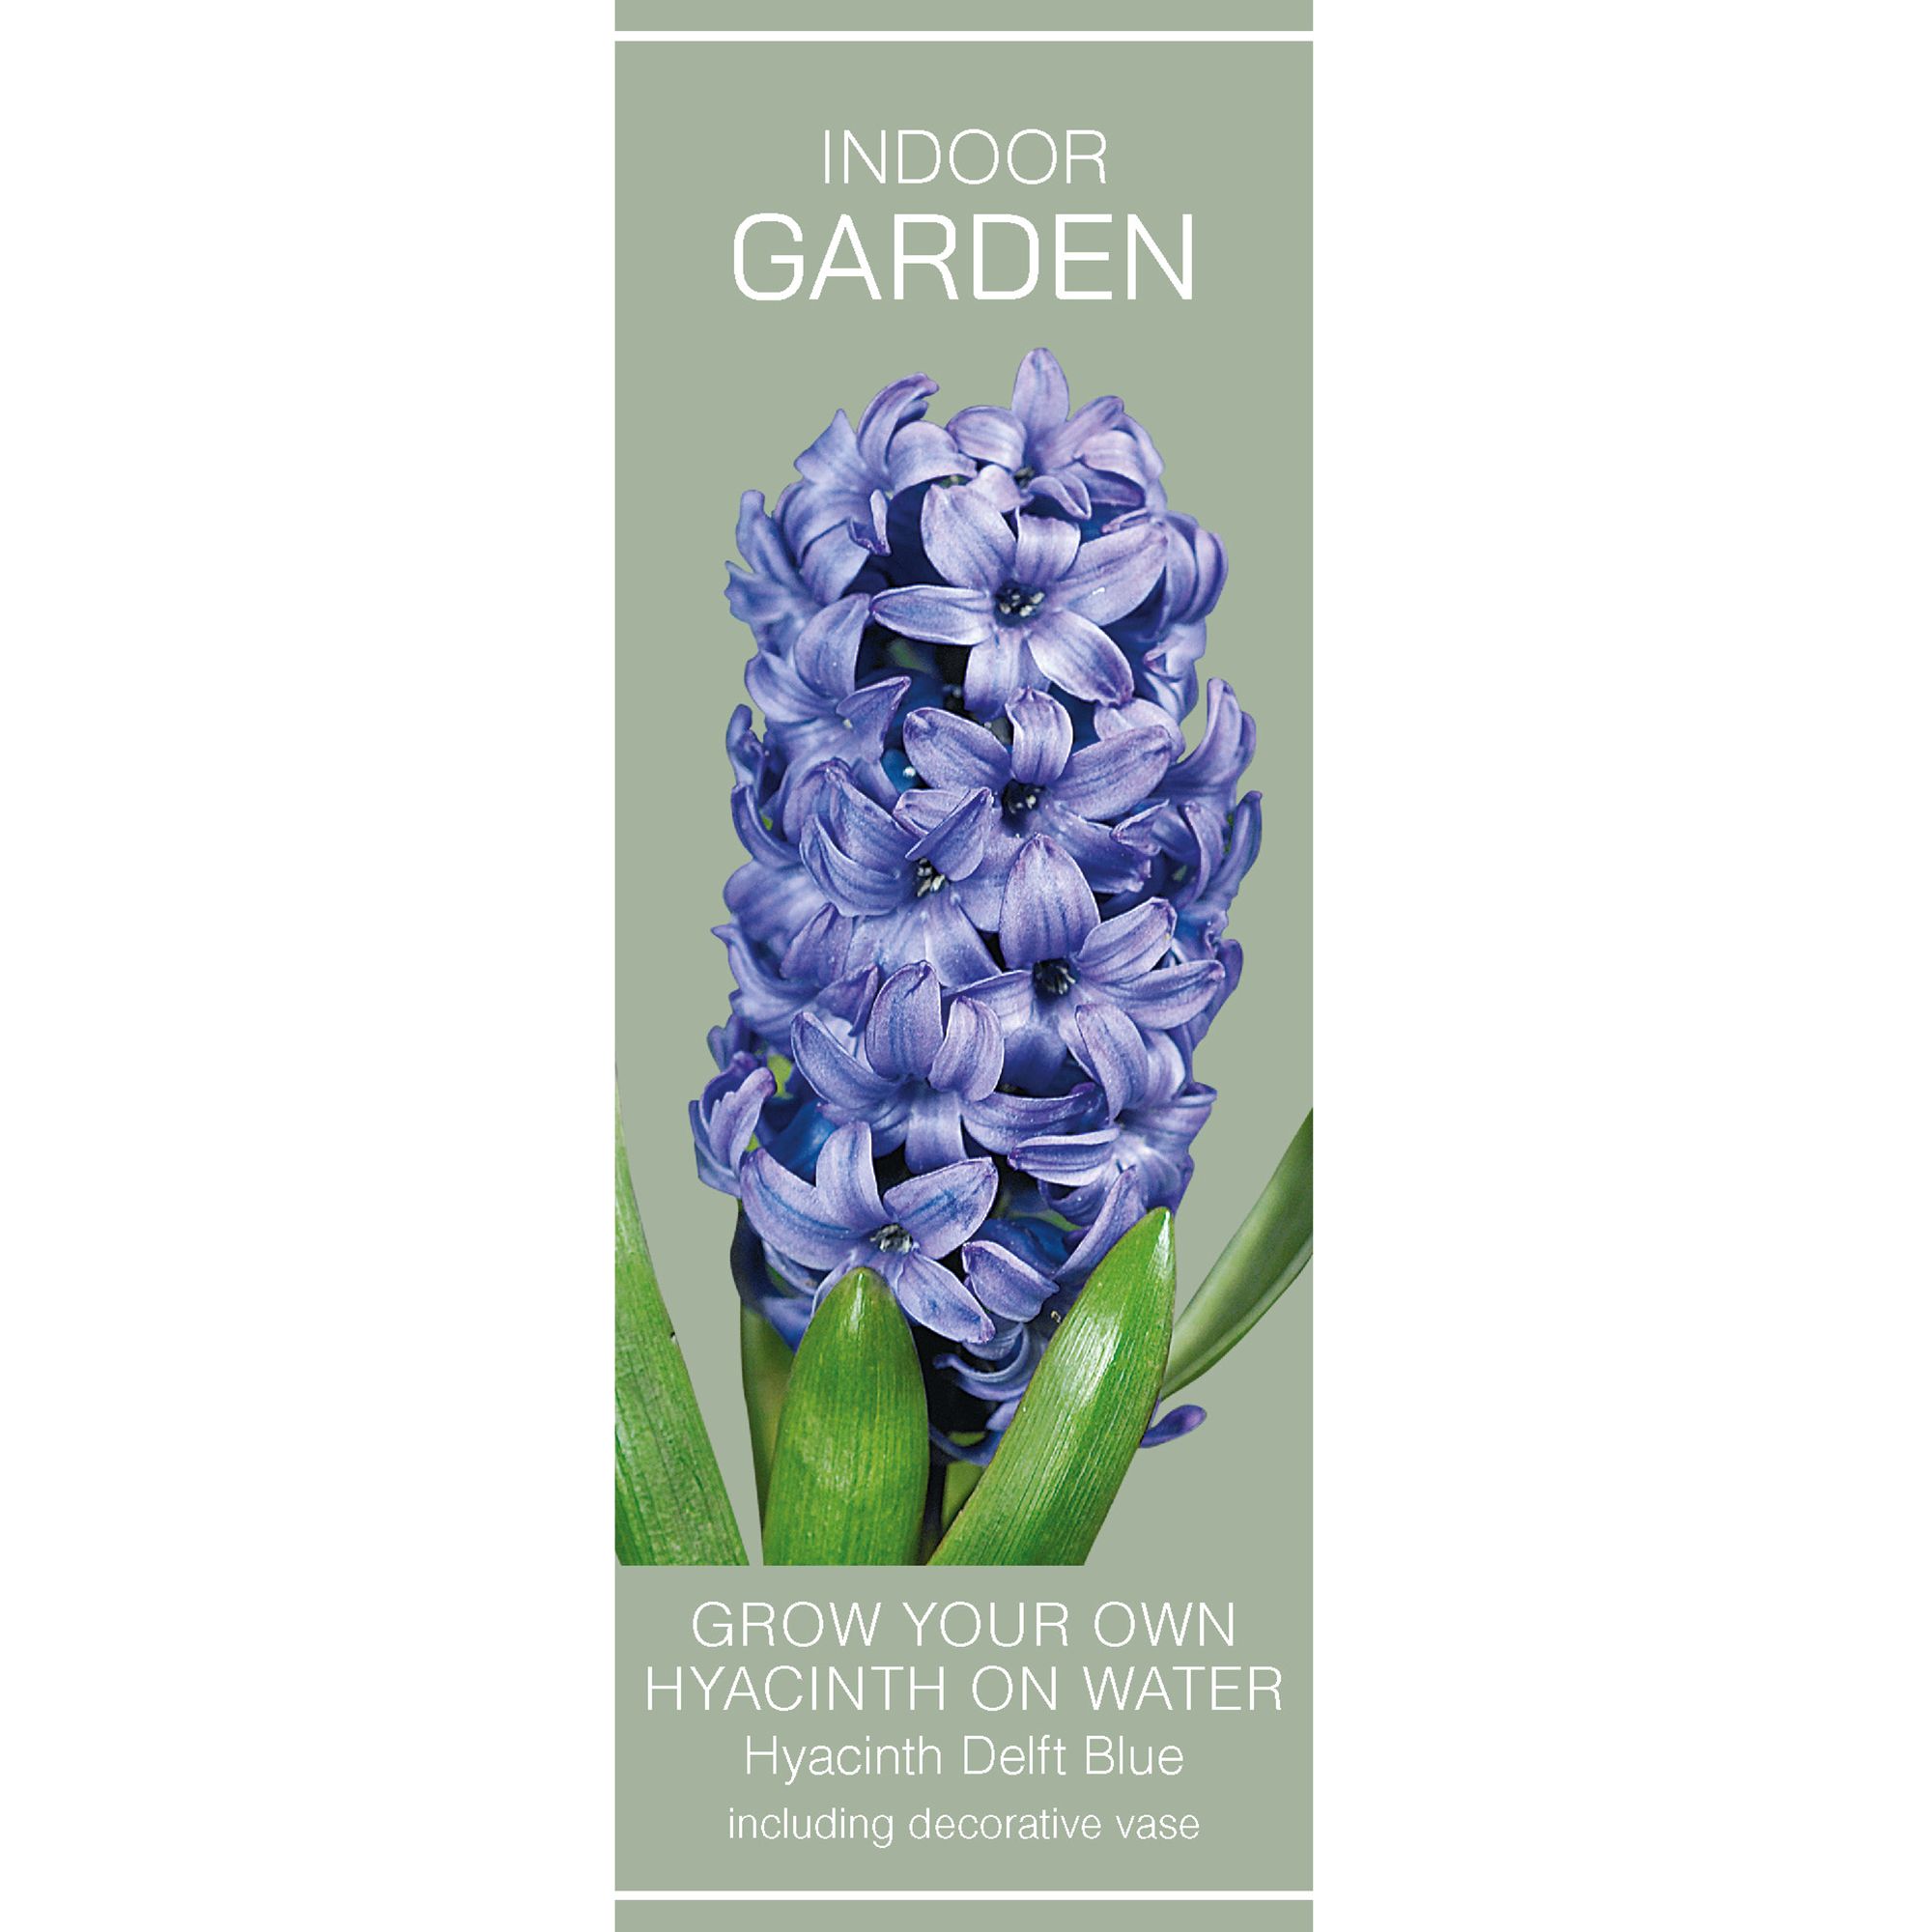 Hyacinthus Delft Blue Flower bulb, comes in Glass Container